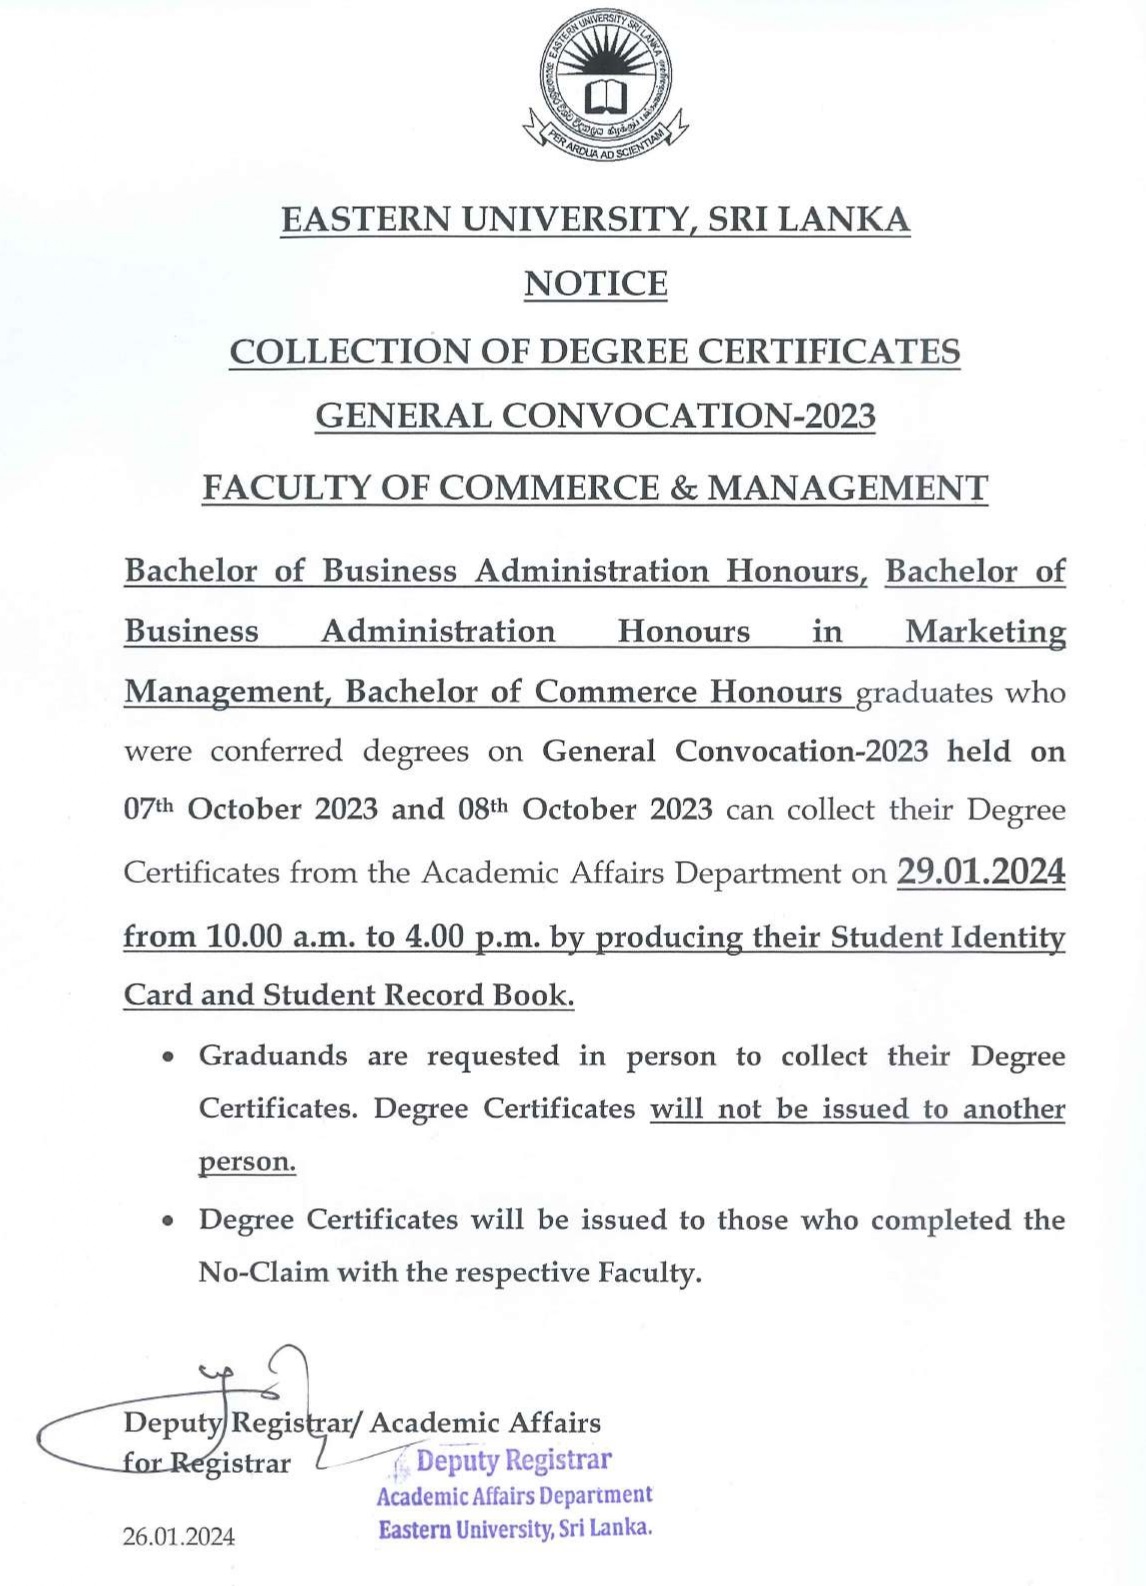  Faculty of Commerce & Mgt Issuing of Degree Certificates_page-0001.jpg 